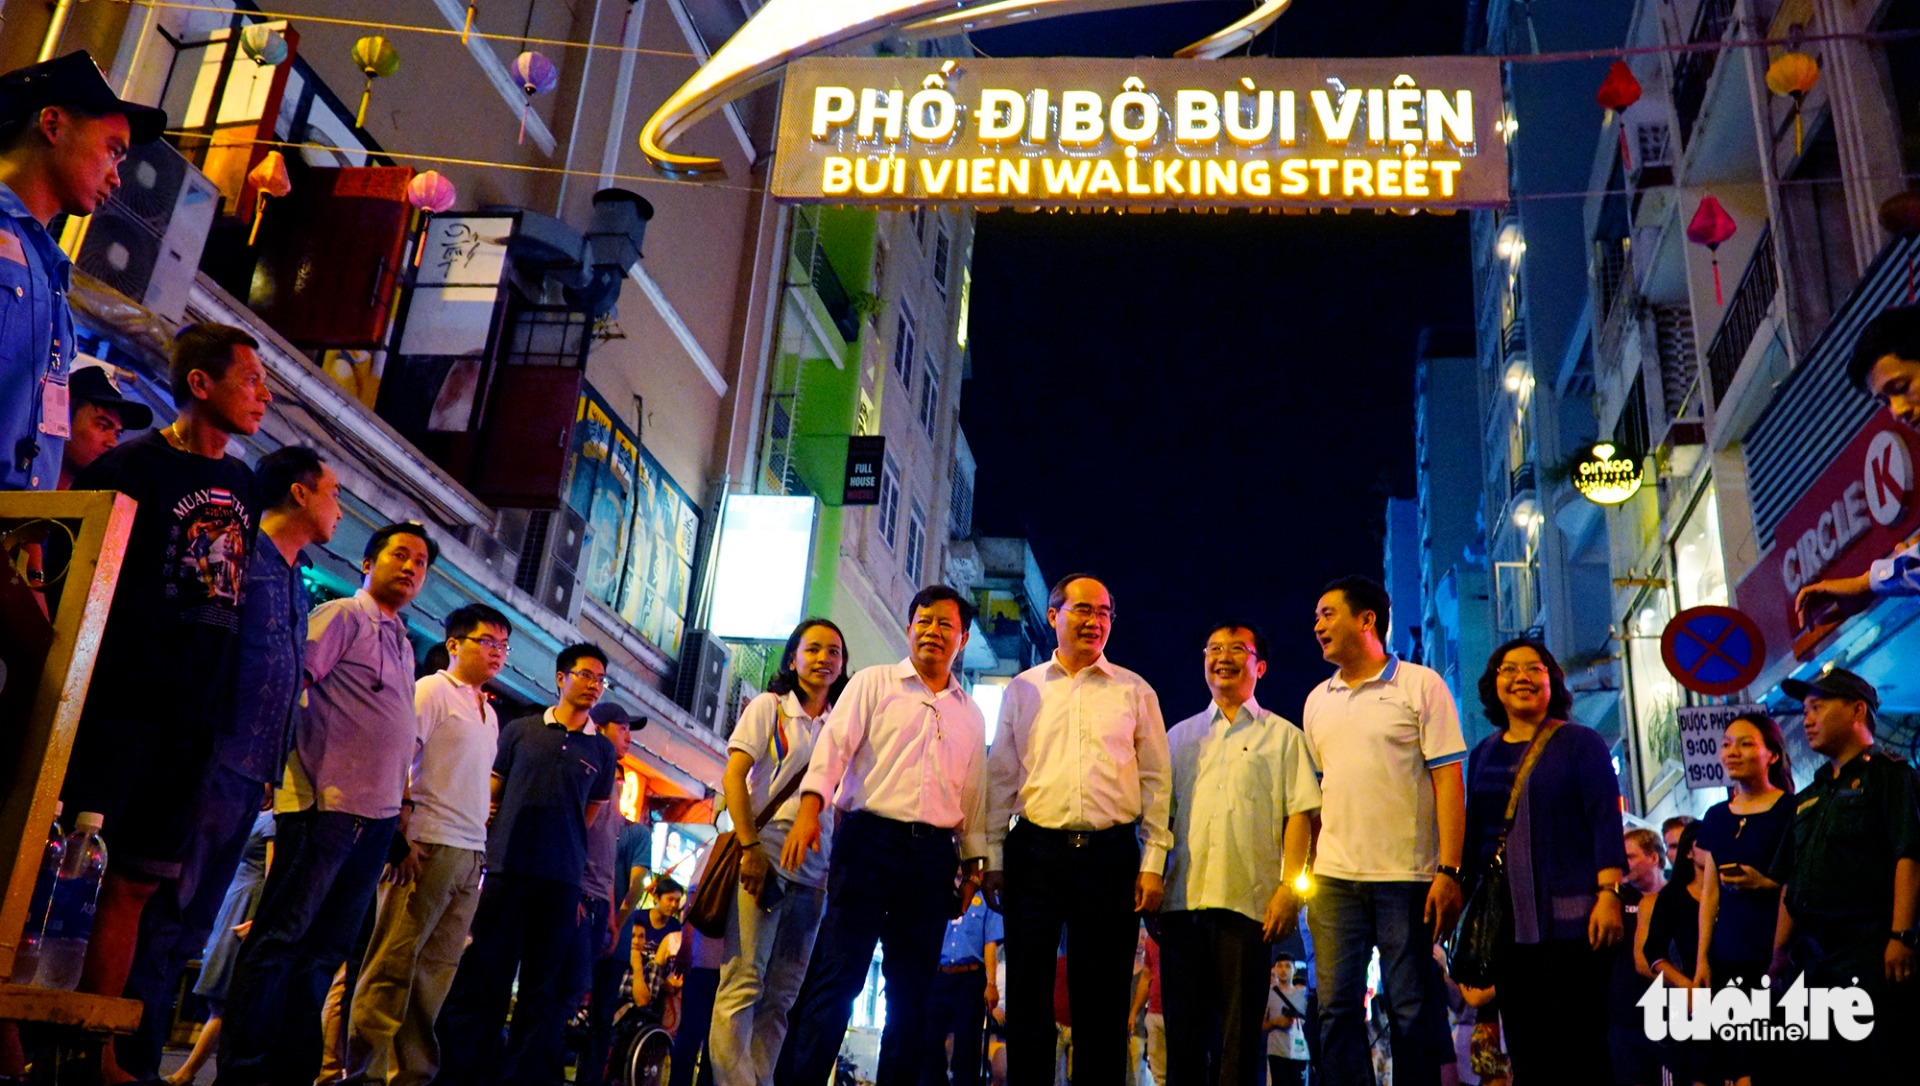 Nguyen Thien Nhan (fourth R), Party chief of Ho Chi Minh City, poses for a photo at the entrance to Bui Vien Walking Street. Photo: Tuoi Tre